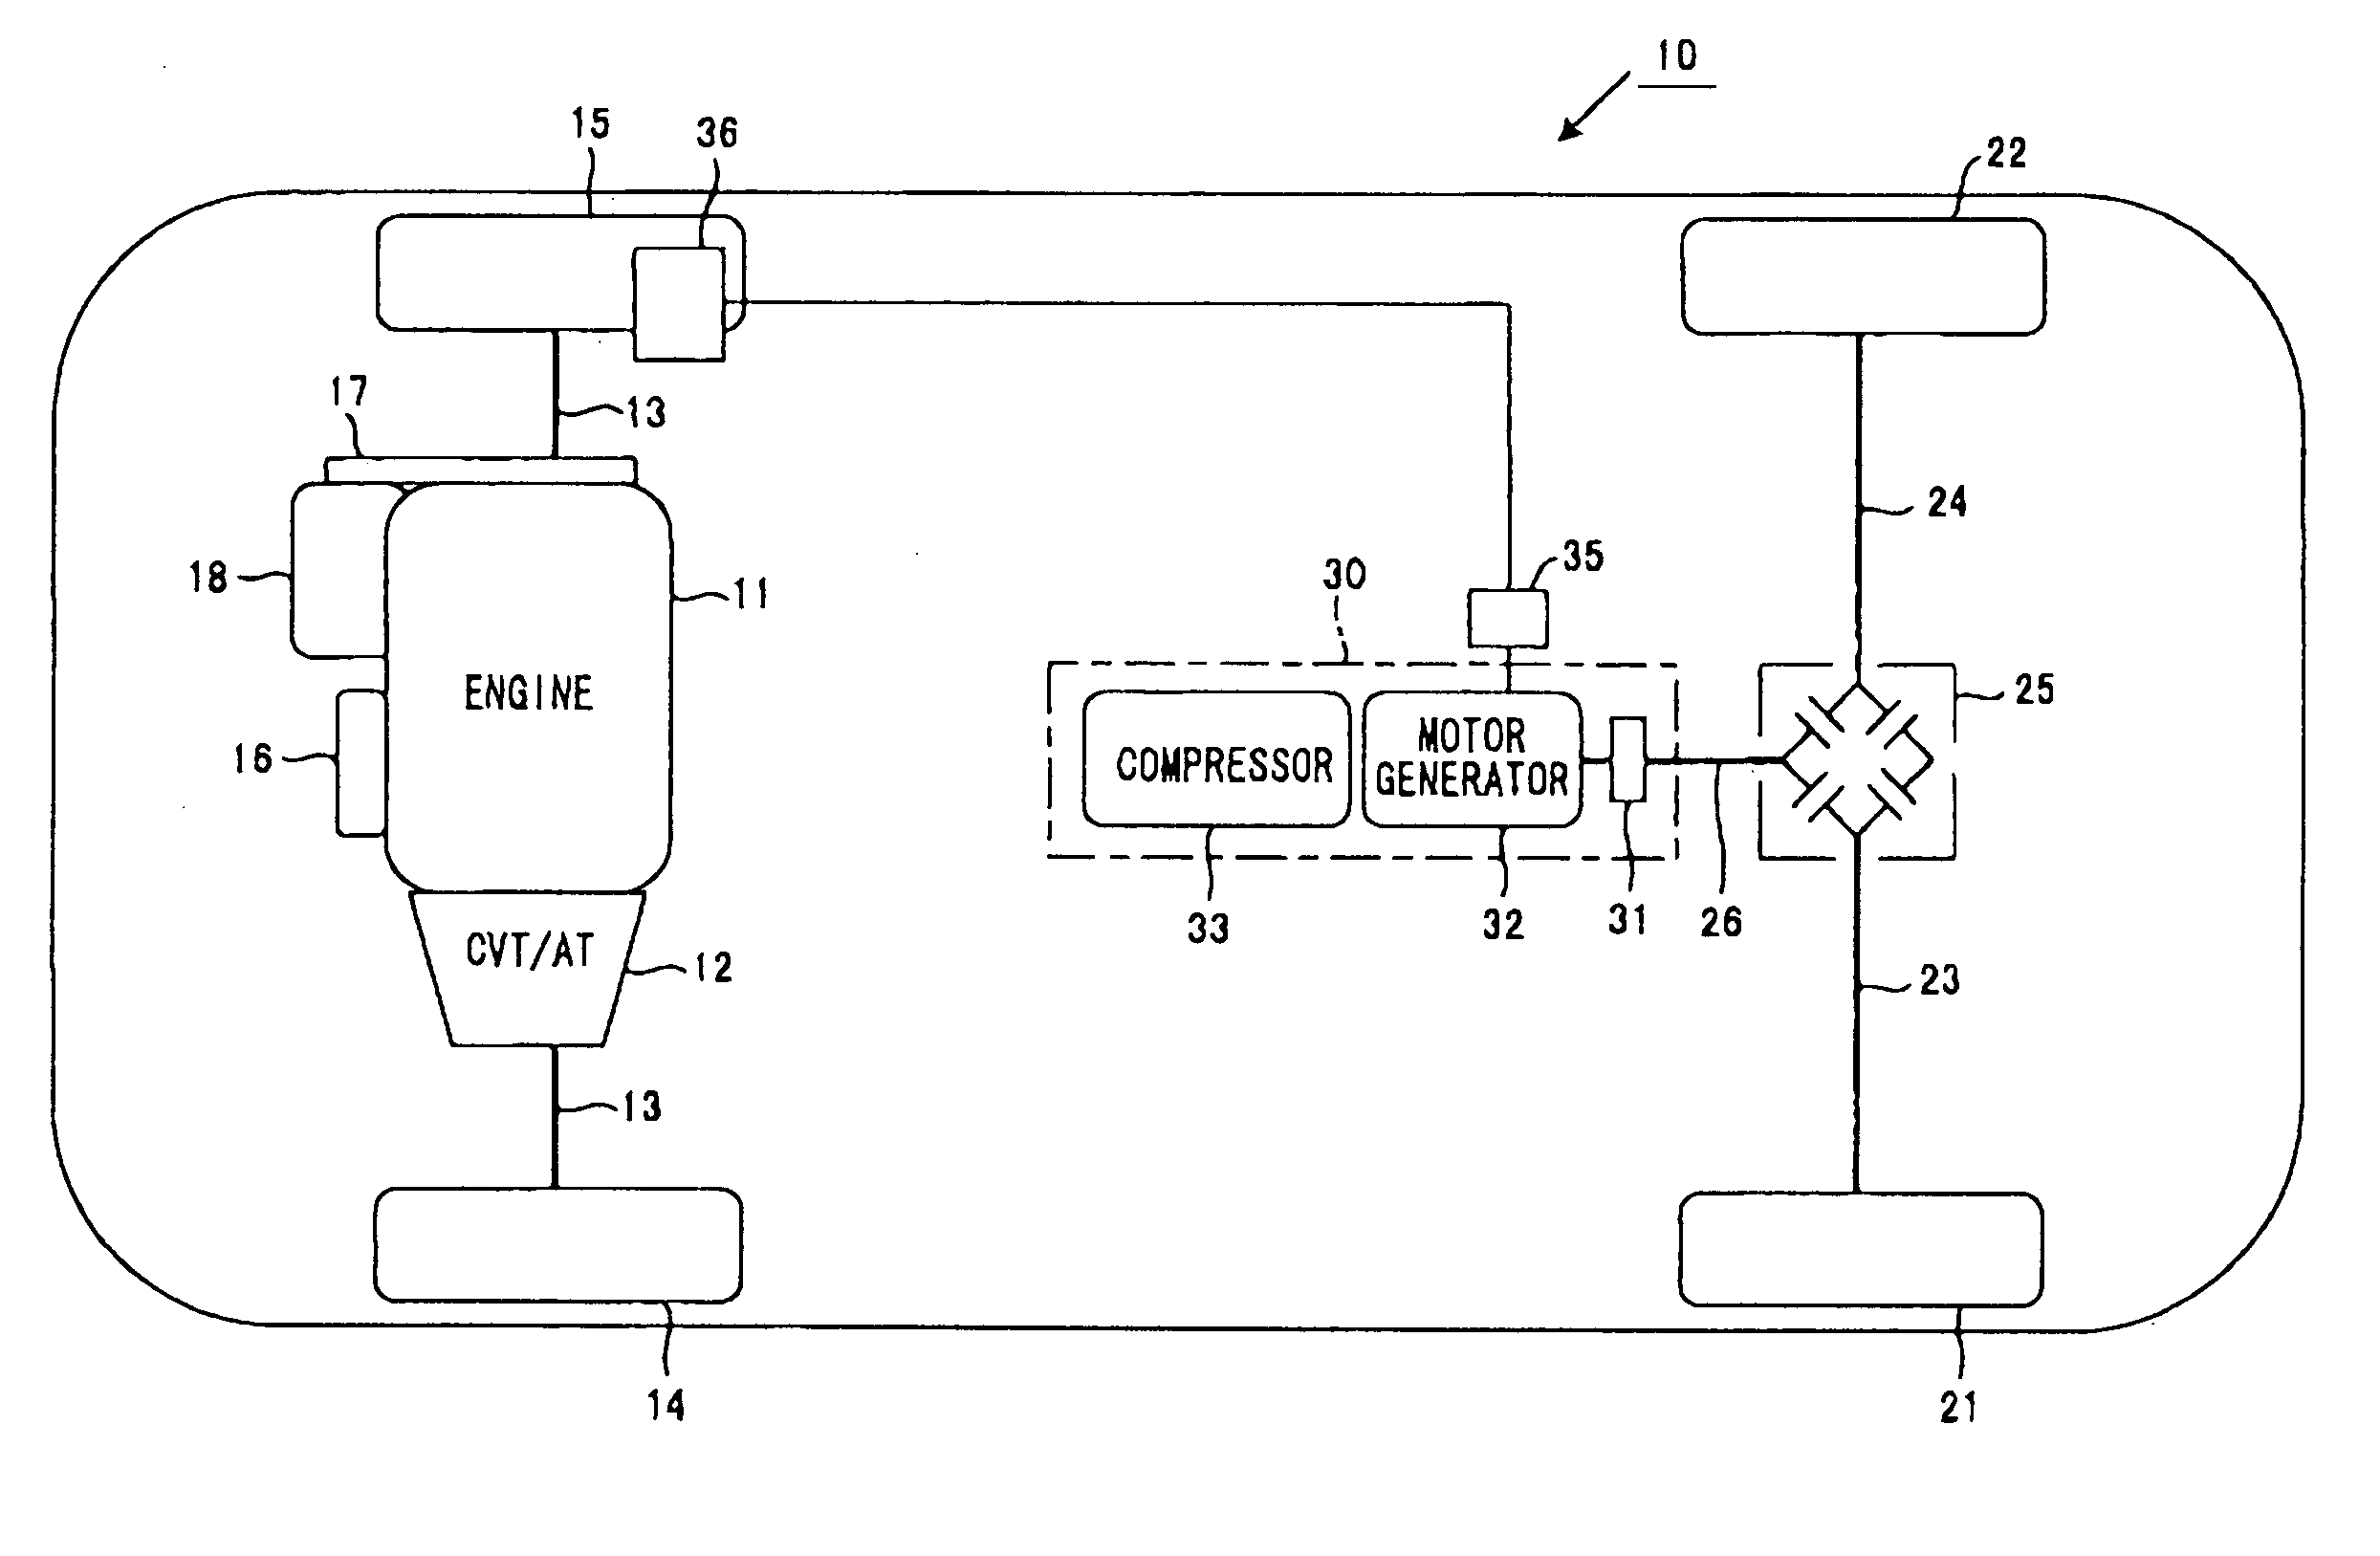 Power train system for vehicle